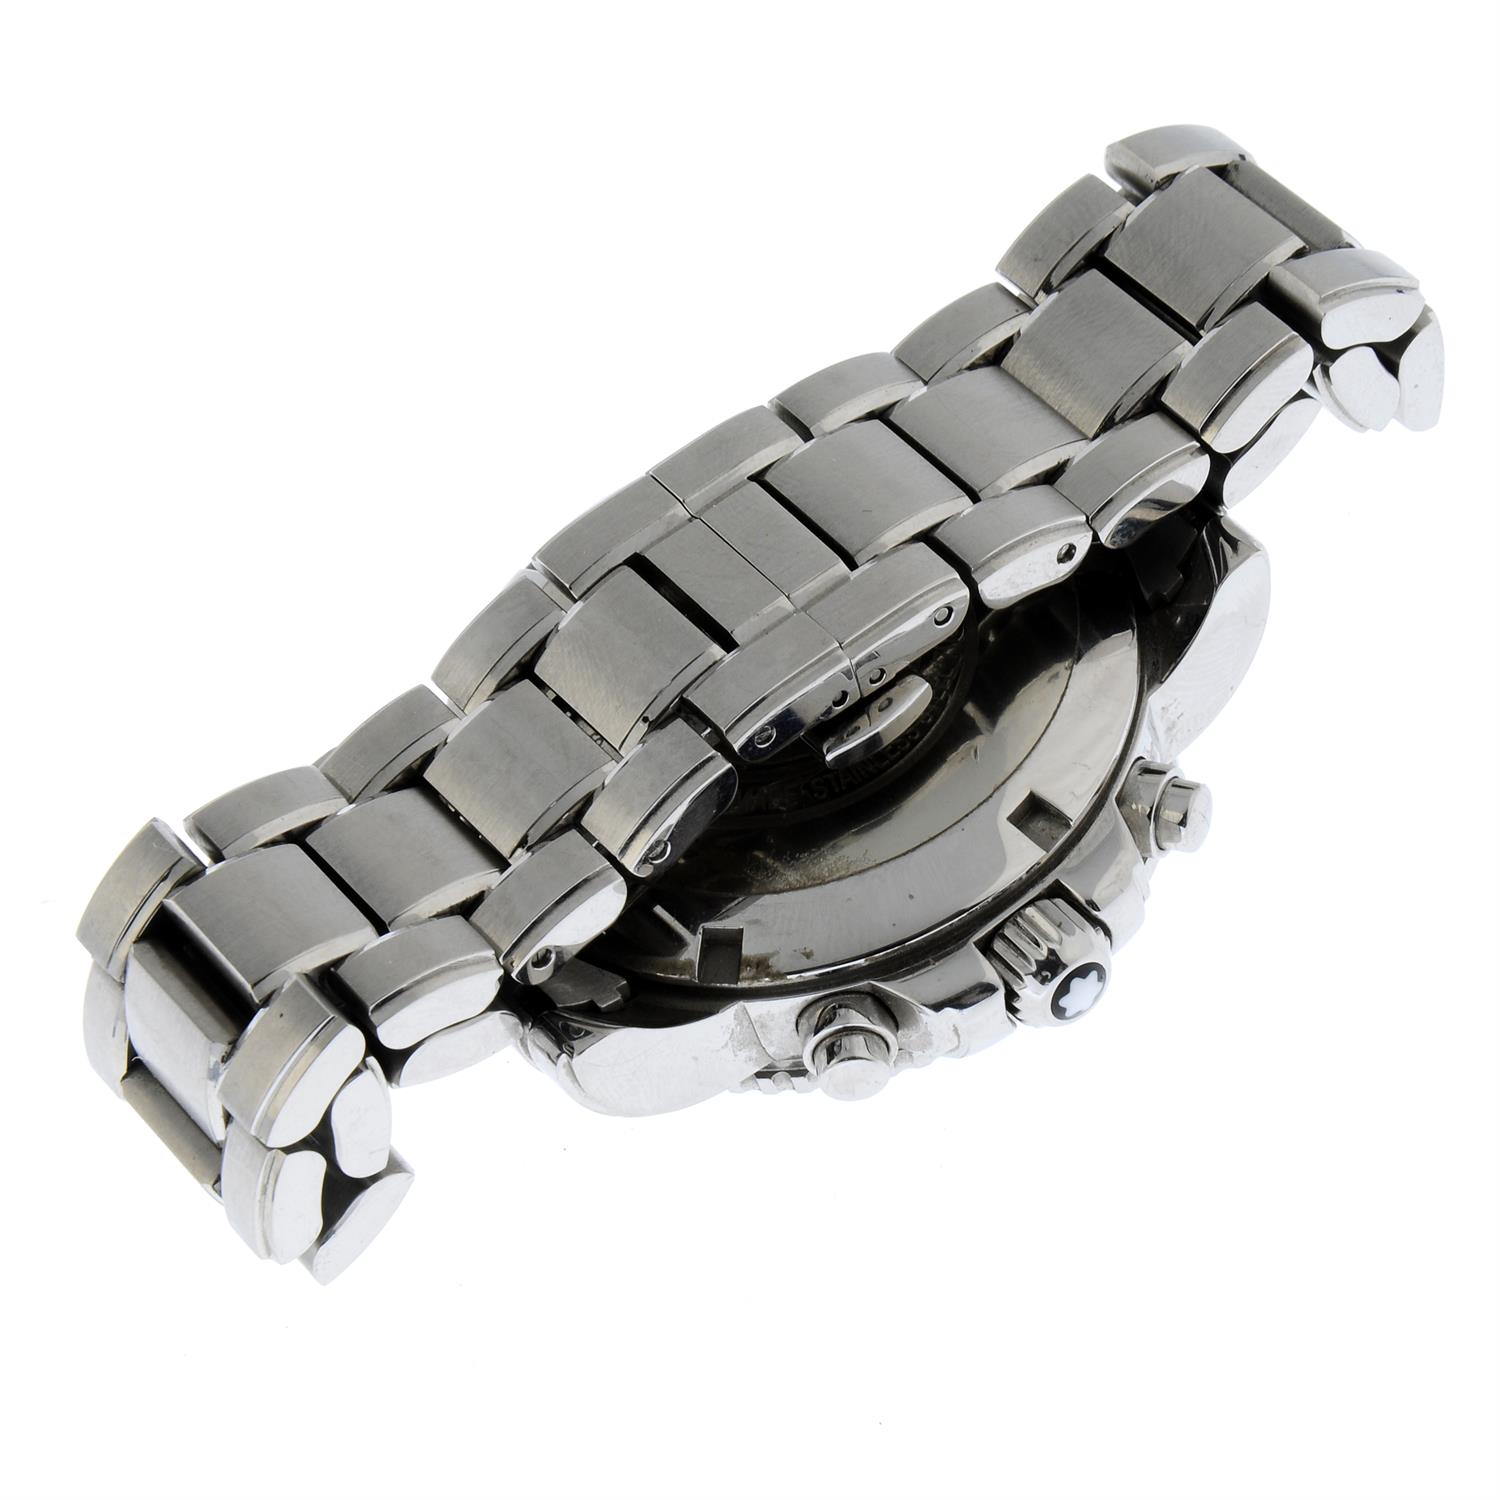 MONTBLANC - a stainless steel Meisterstuck chronograph bracelet watch, 45mm. - Image 3 of 6